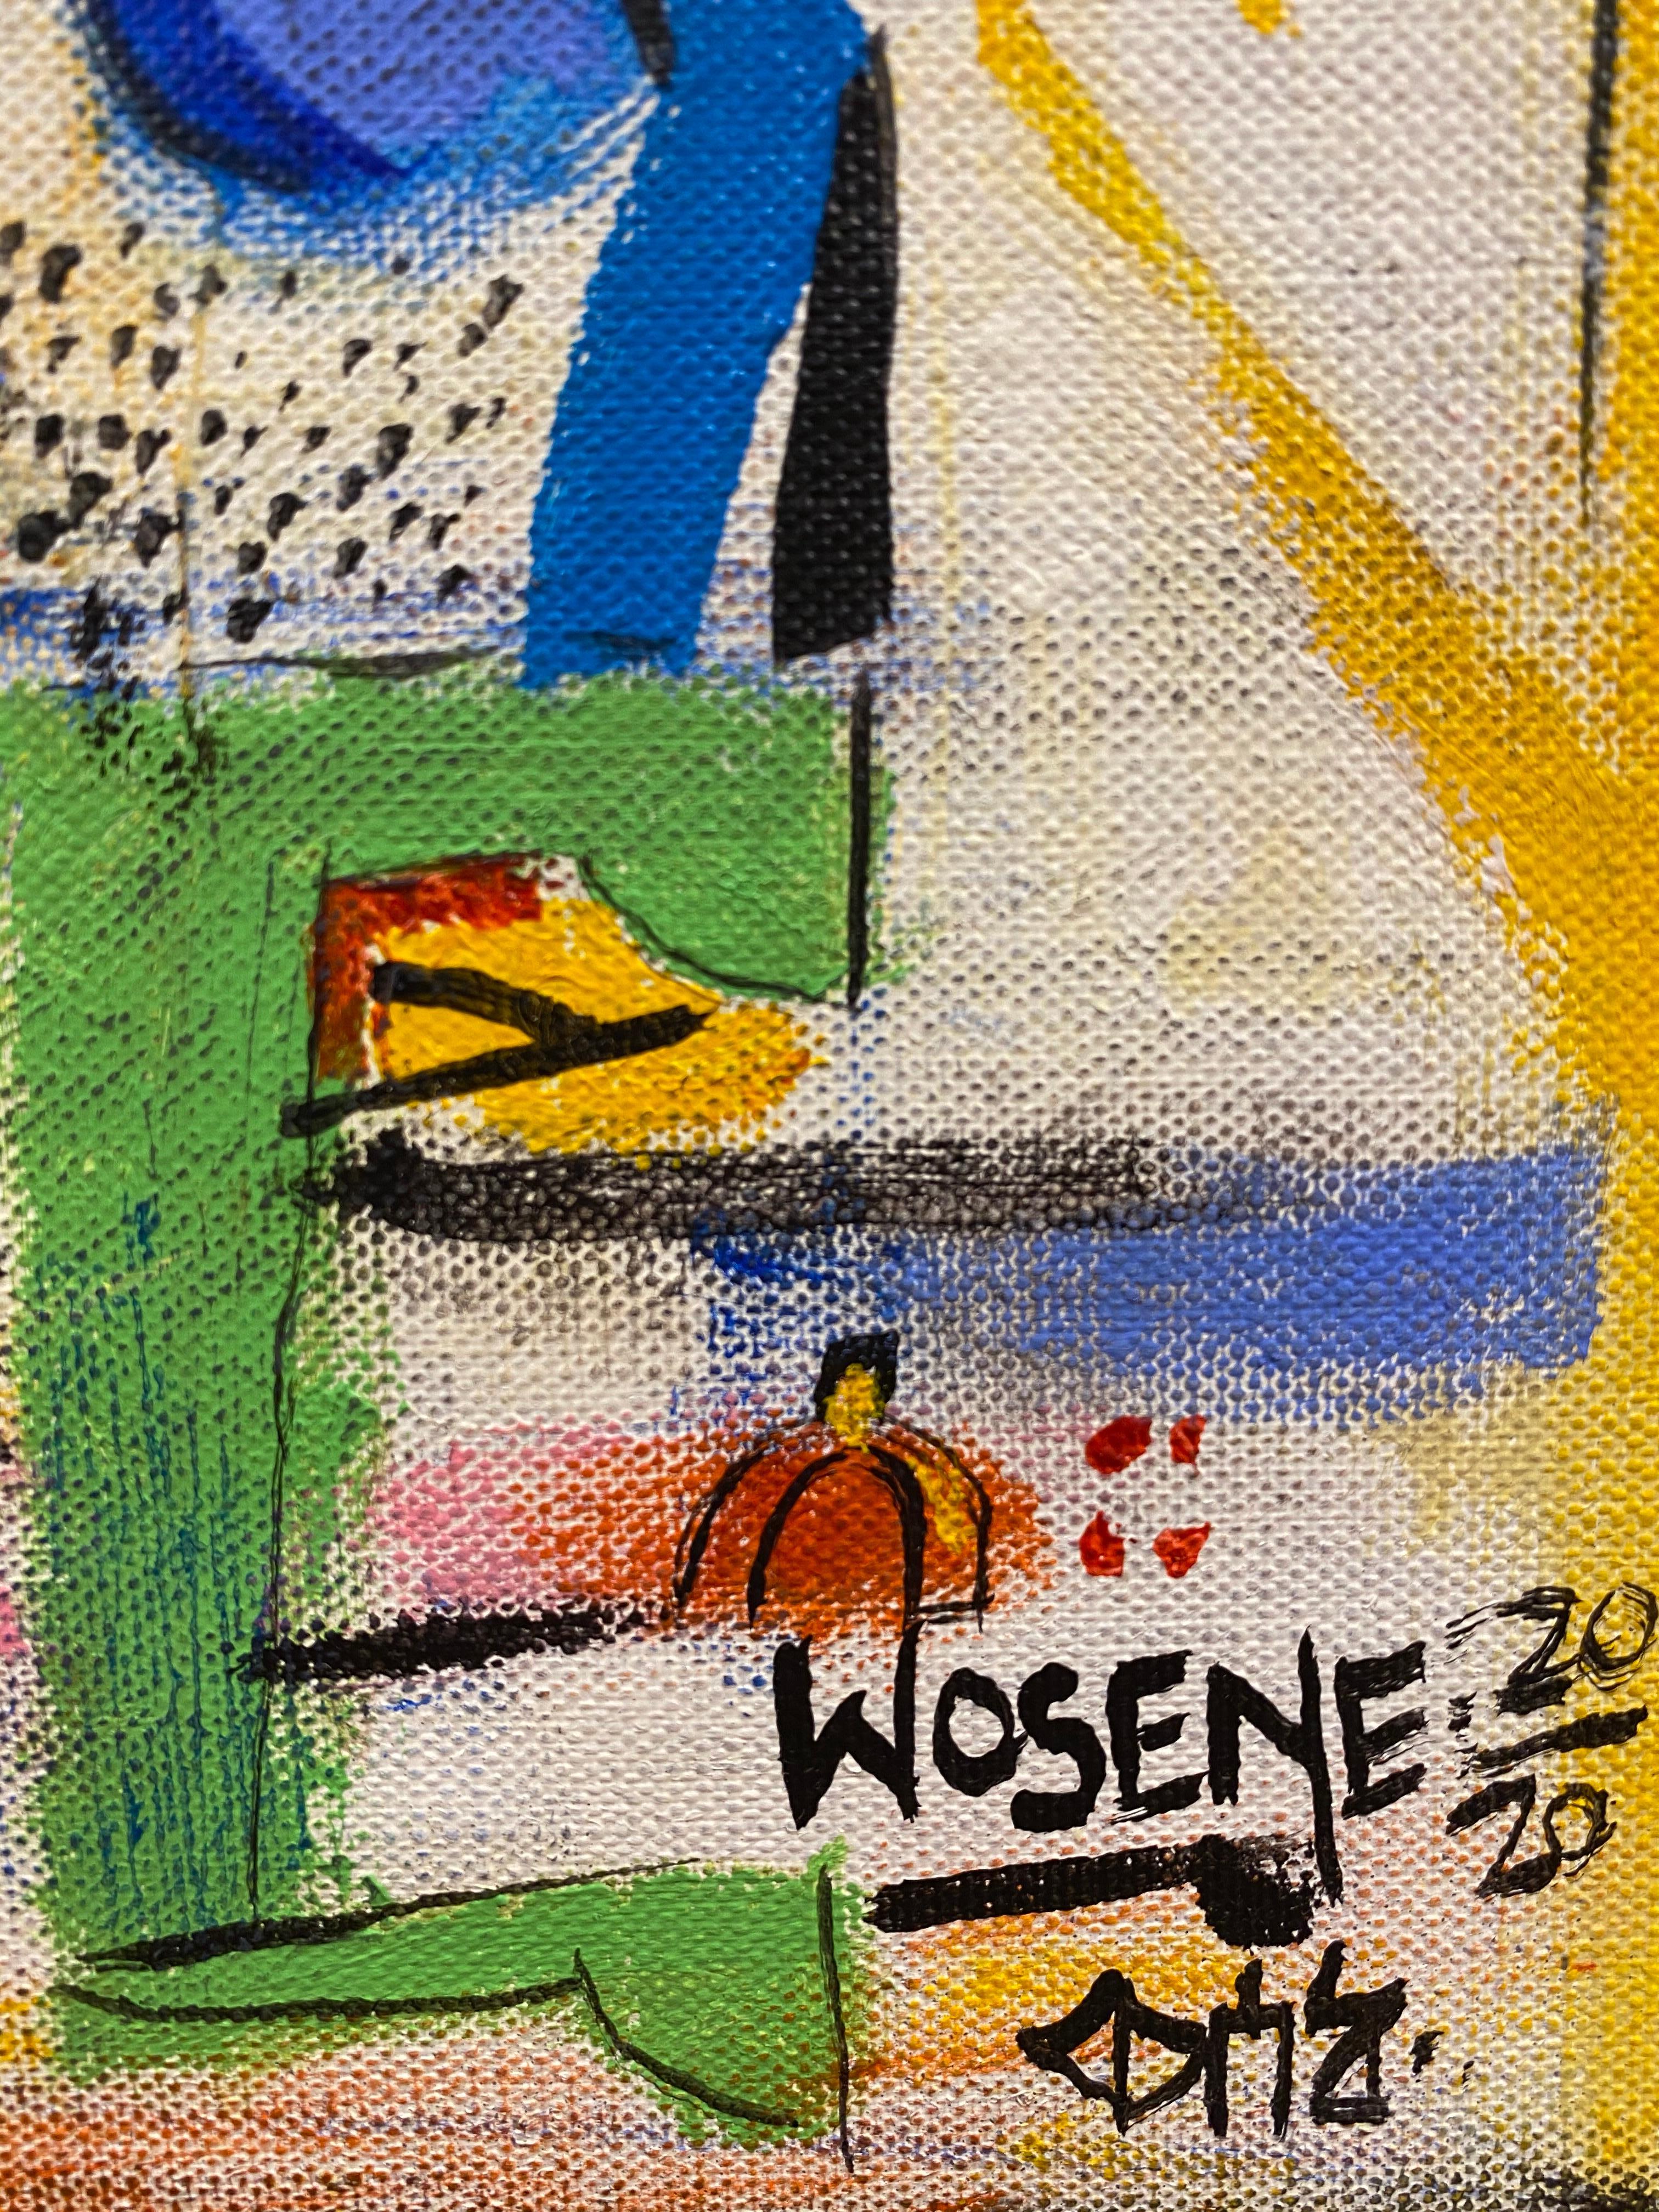 Wosene Worke Kosrof semi-abstract painting 'Sketch for a Hat V' 5